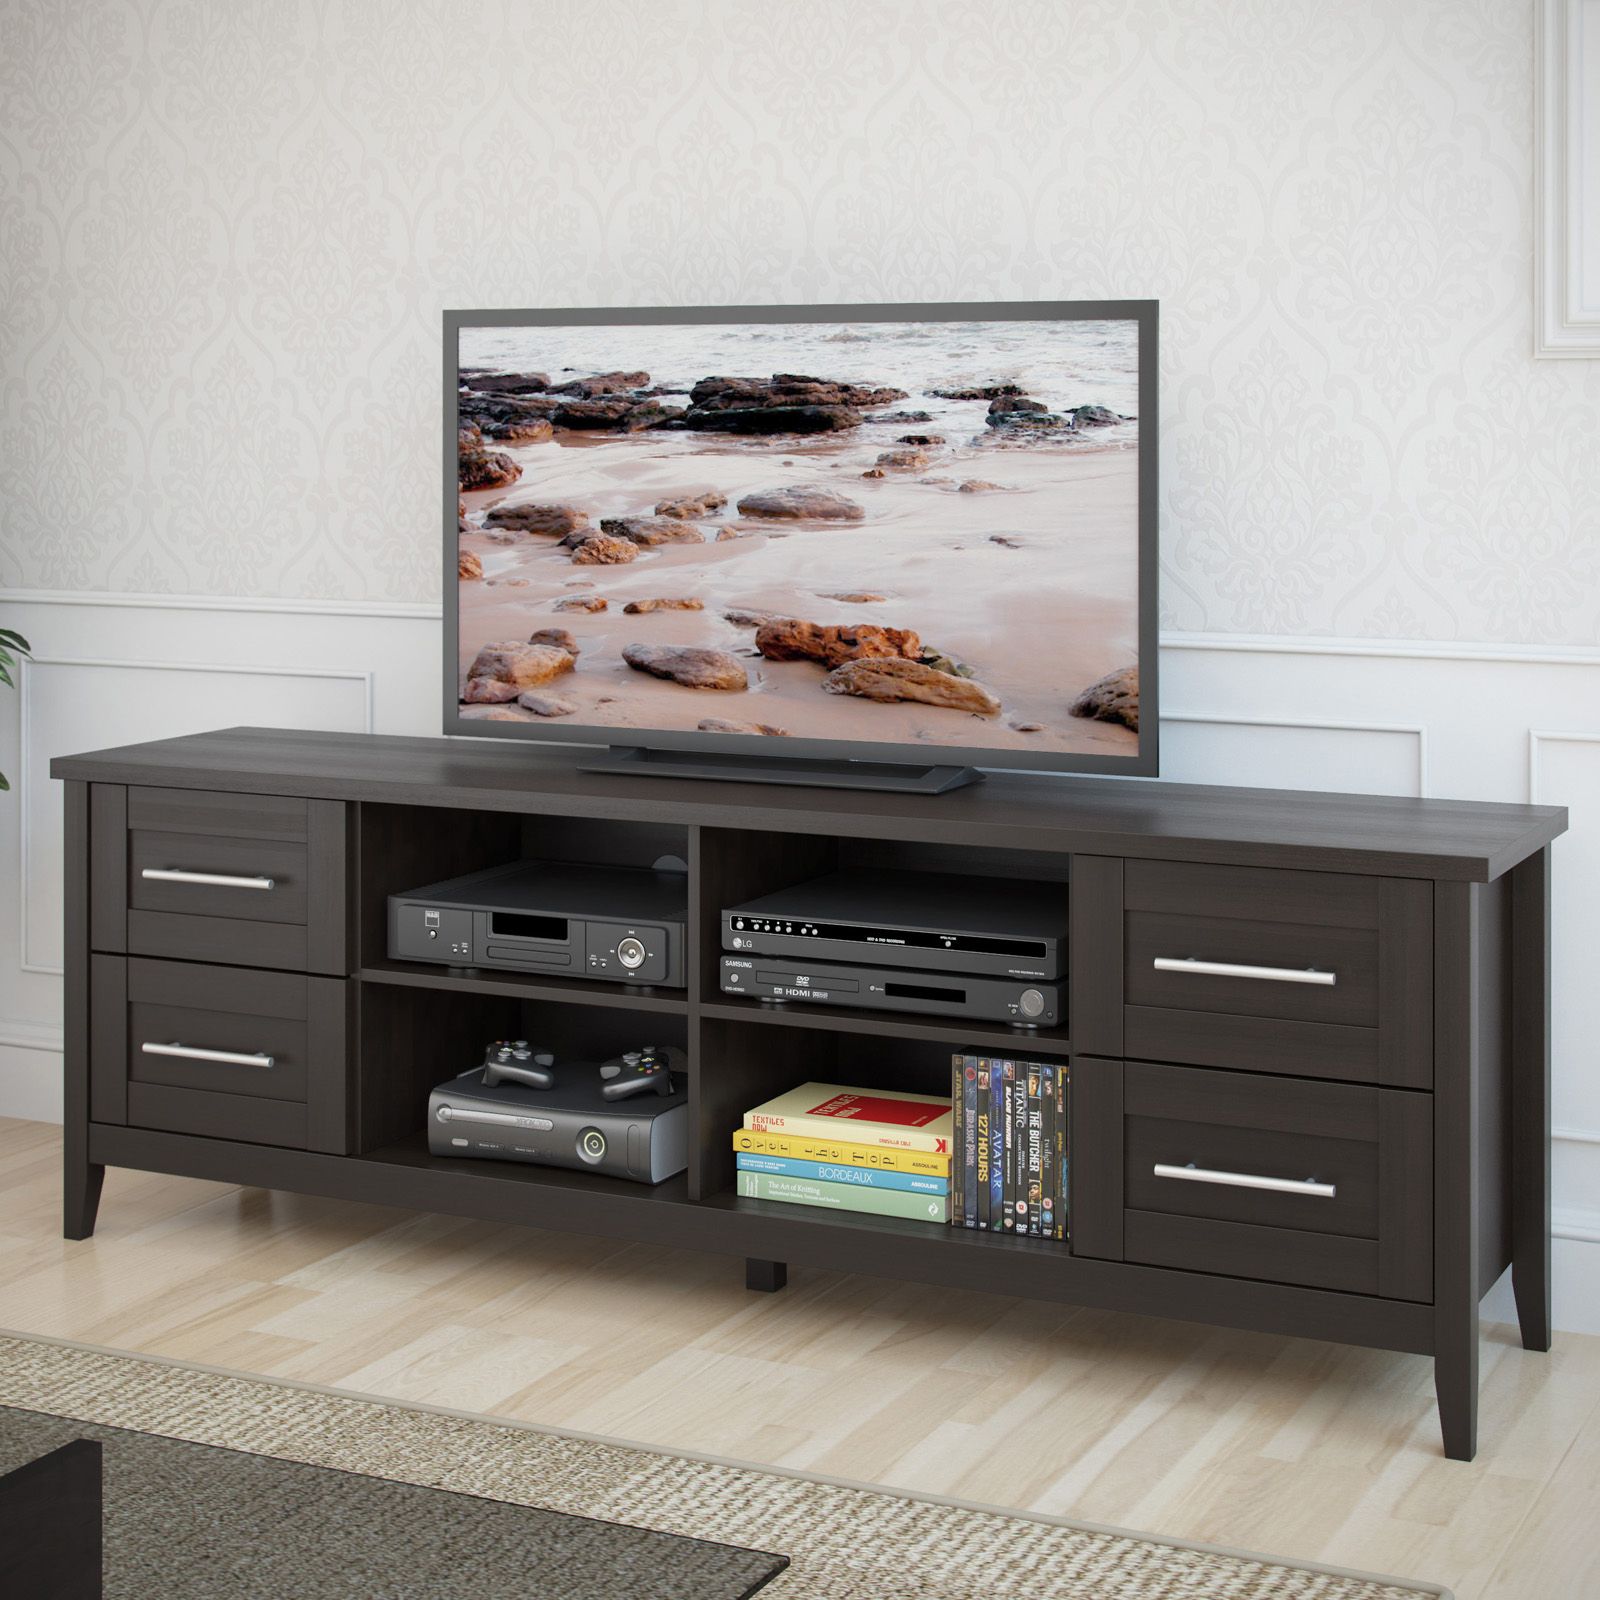 Corliving Tjk 682 B Jackson Extra Wide Tv Bench – Espresso With Regard To Anya Wide Tv Stands (Photo 4 of 15)